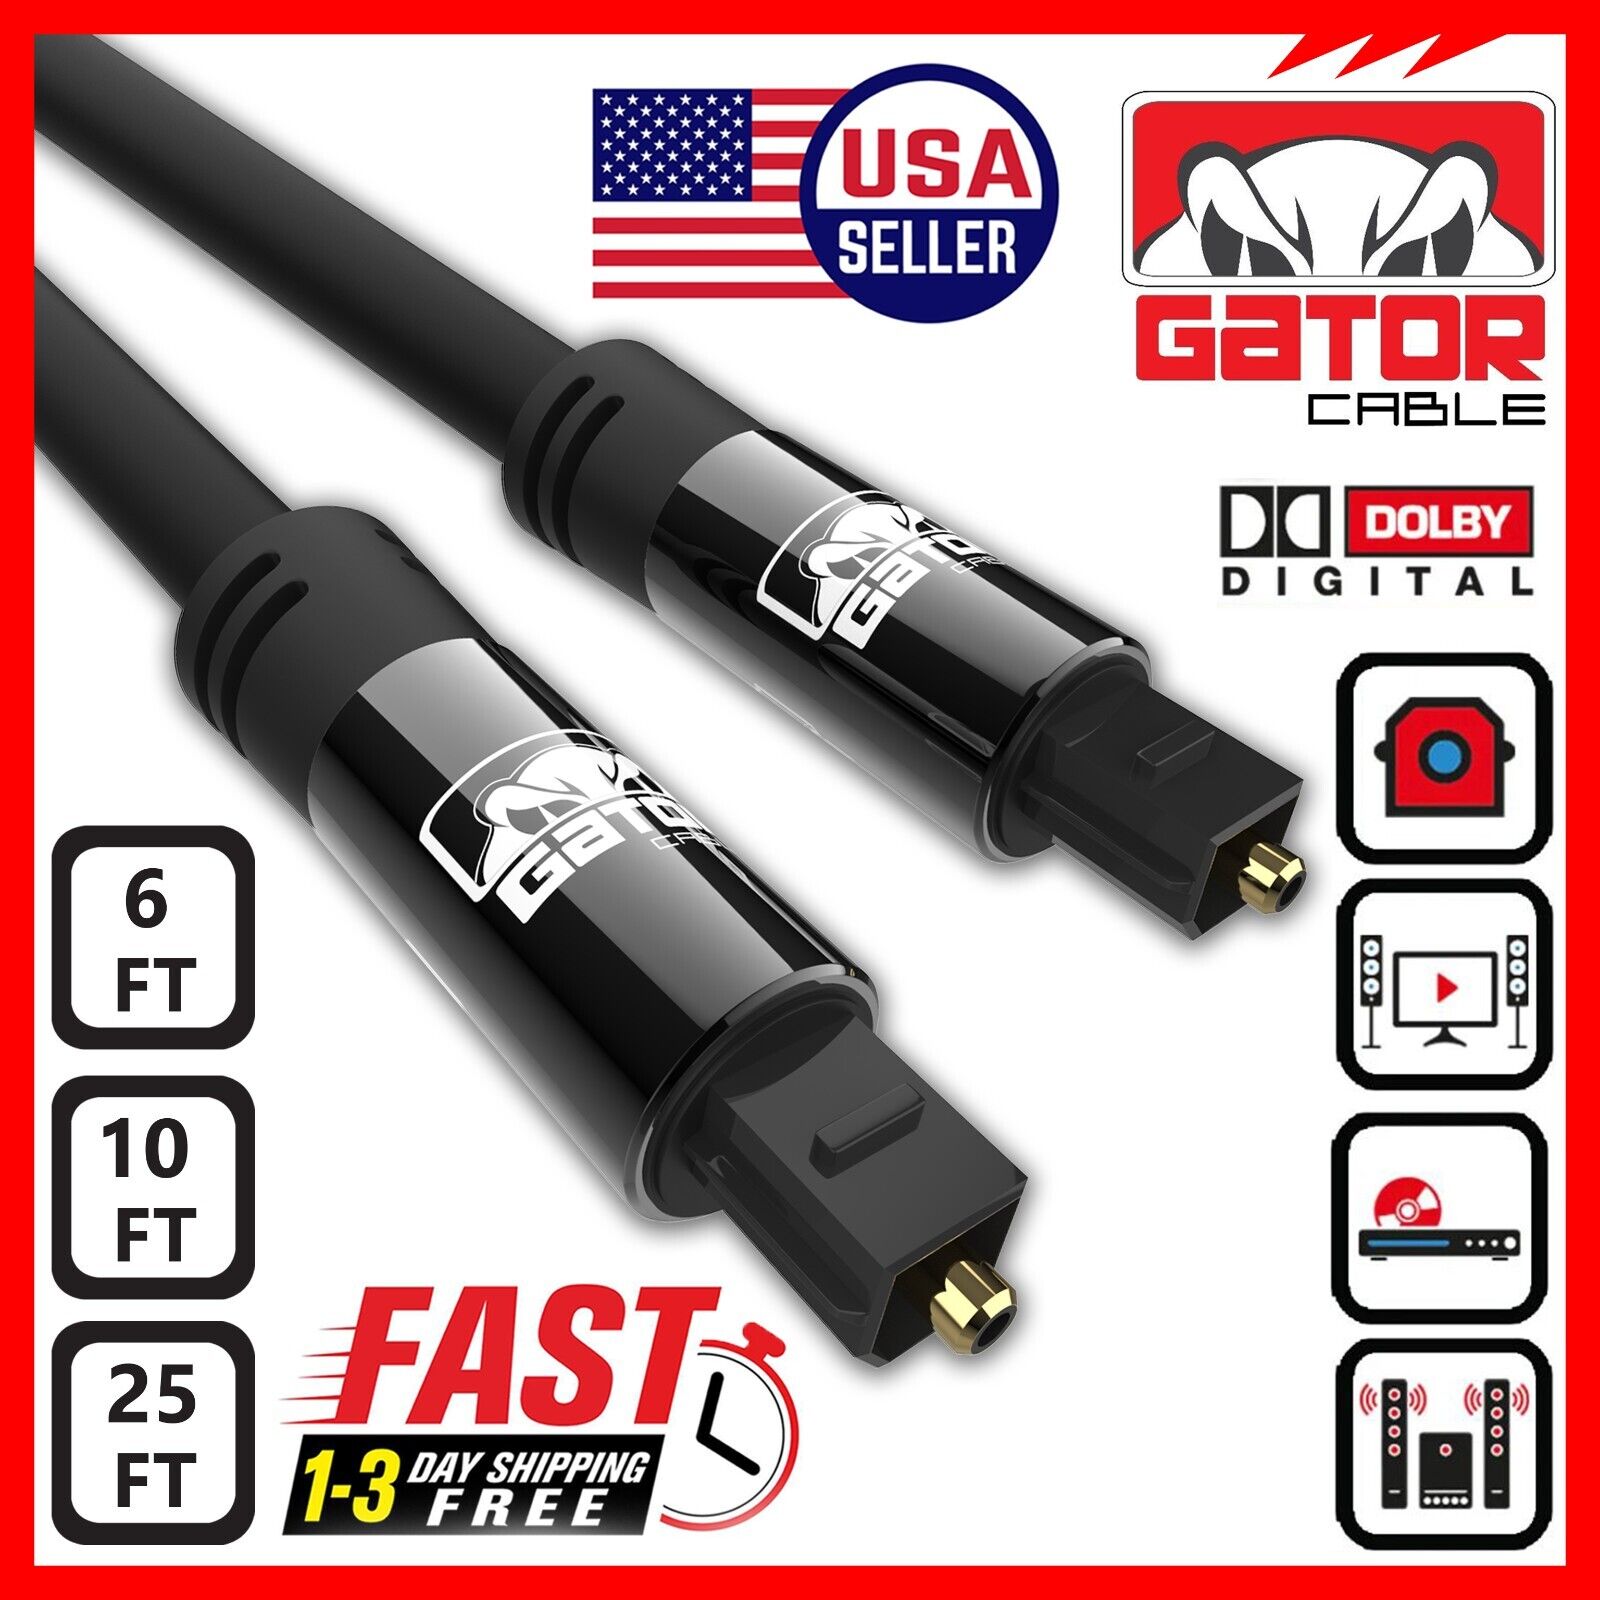 Toslink Optical Cable Digital Audio Sound Fiber Optic SPDIF Cord Wire Dolby DTS  Gator Cable Toslink-Optical-Cable-Gator-Cable - фотография #9